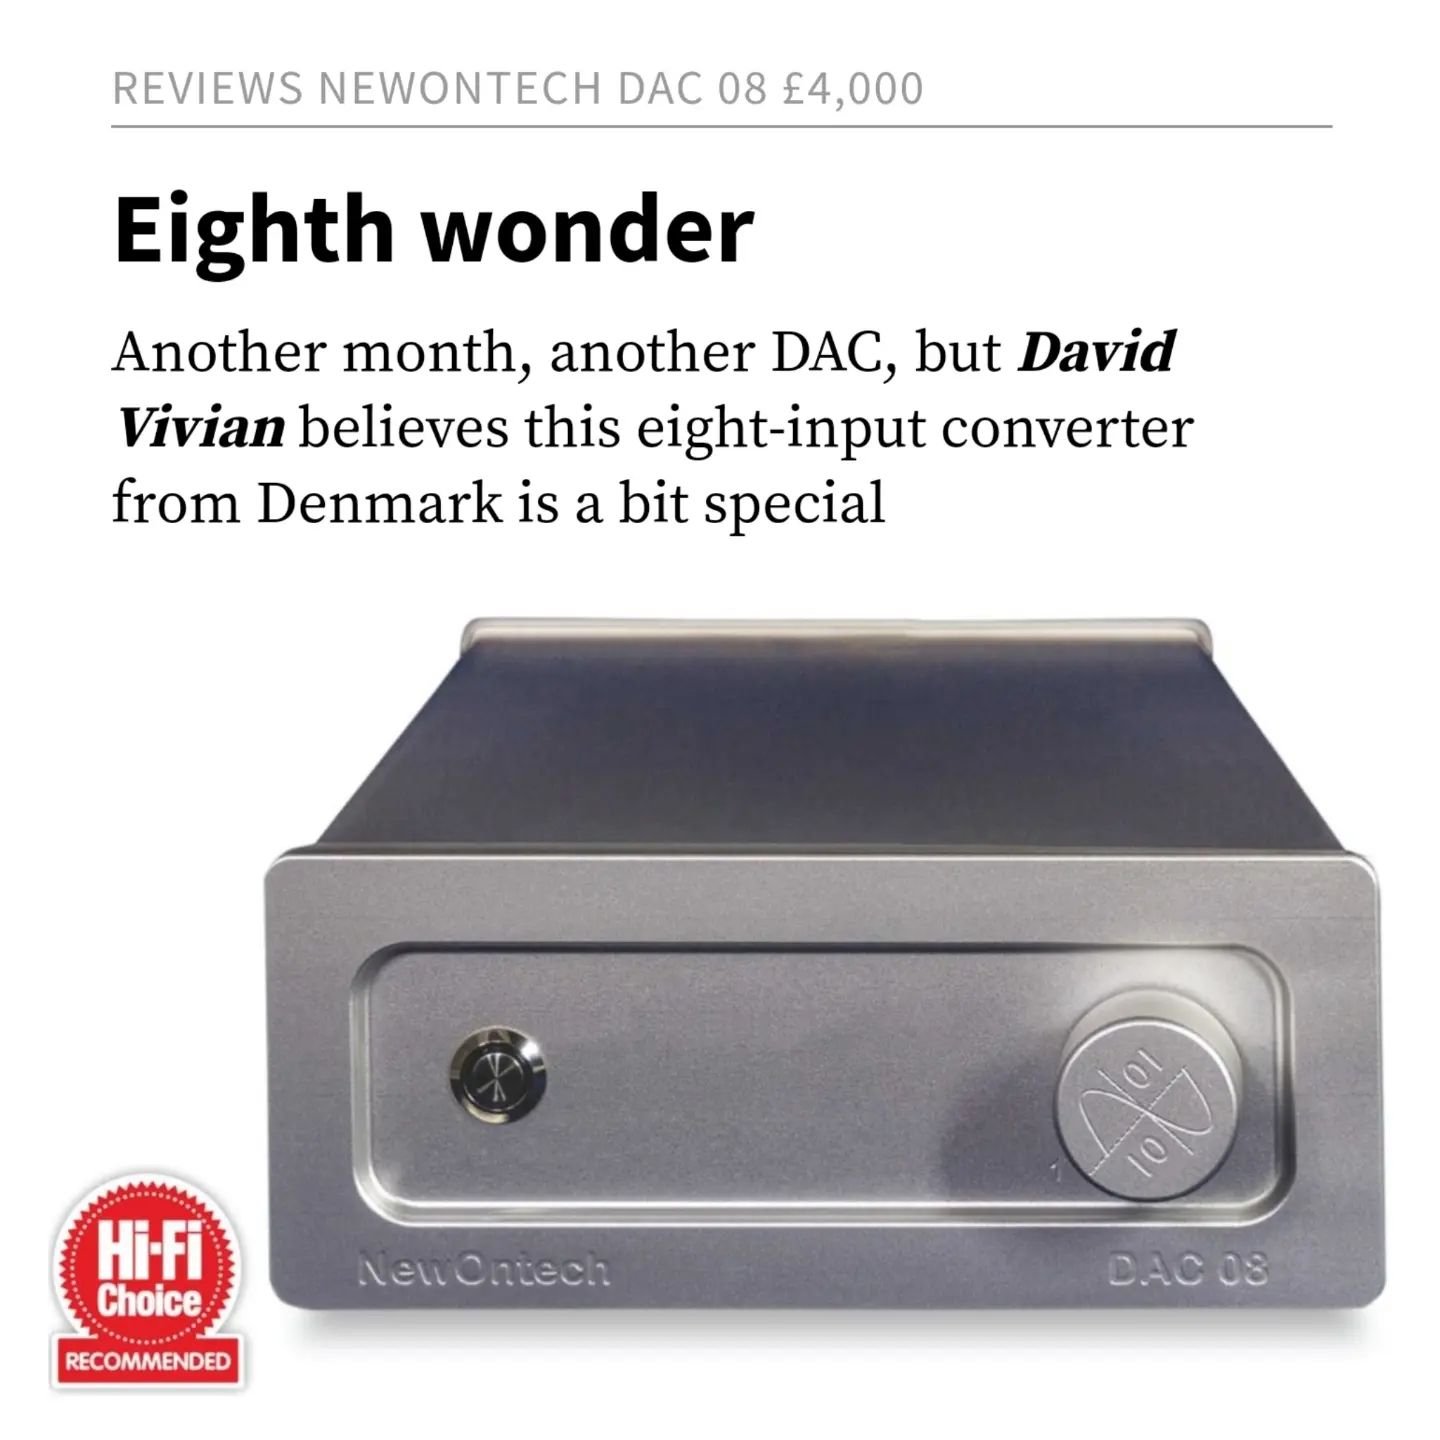 Thanks to David Vivian for his absolutely spot on review of the spectacular @newontech.dk DAC08. Be sure to grab the latest issue of HiFi Choice magazine to read the full review and head to www.valhifi.co.uk to purchase this &quot;mini miracle&quot; 